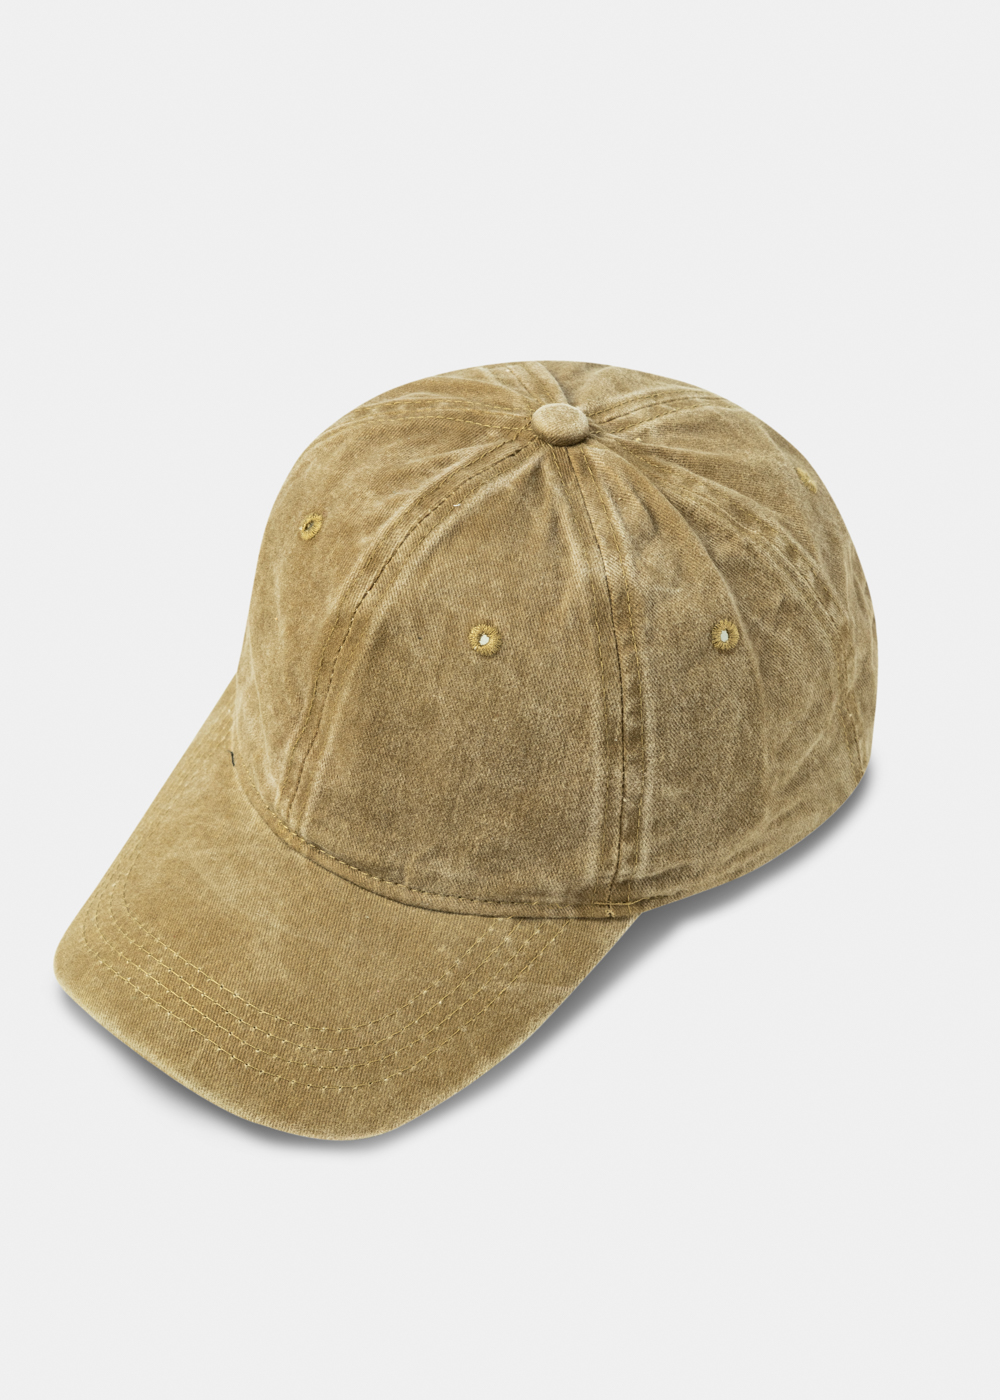 Washed Cotton Twill Cap - Olive